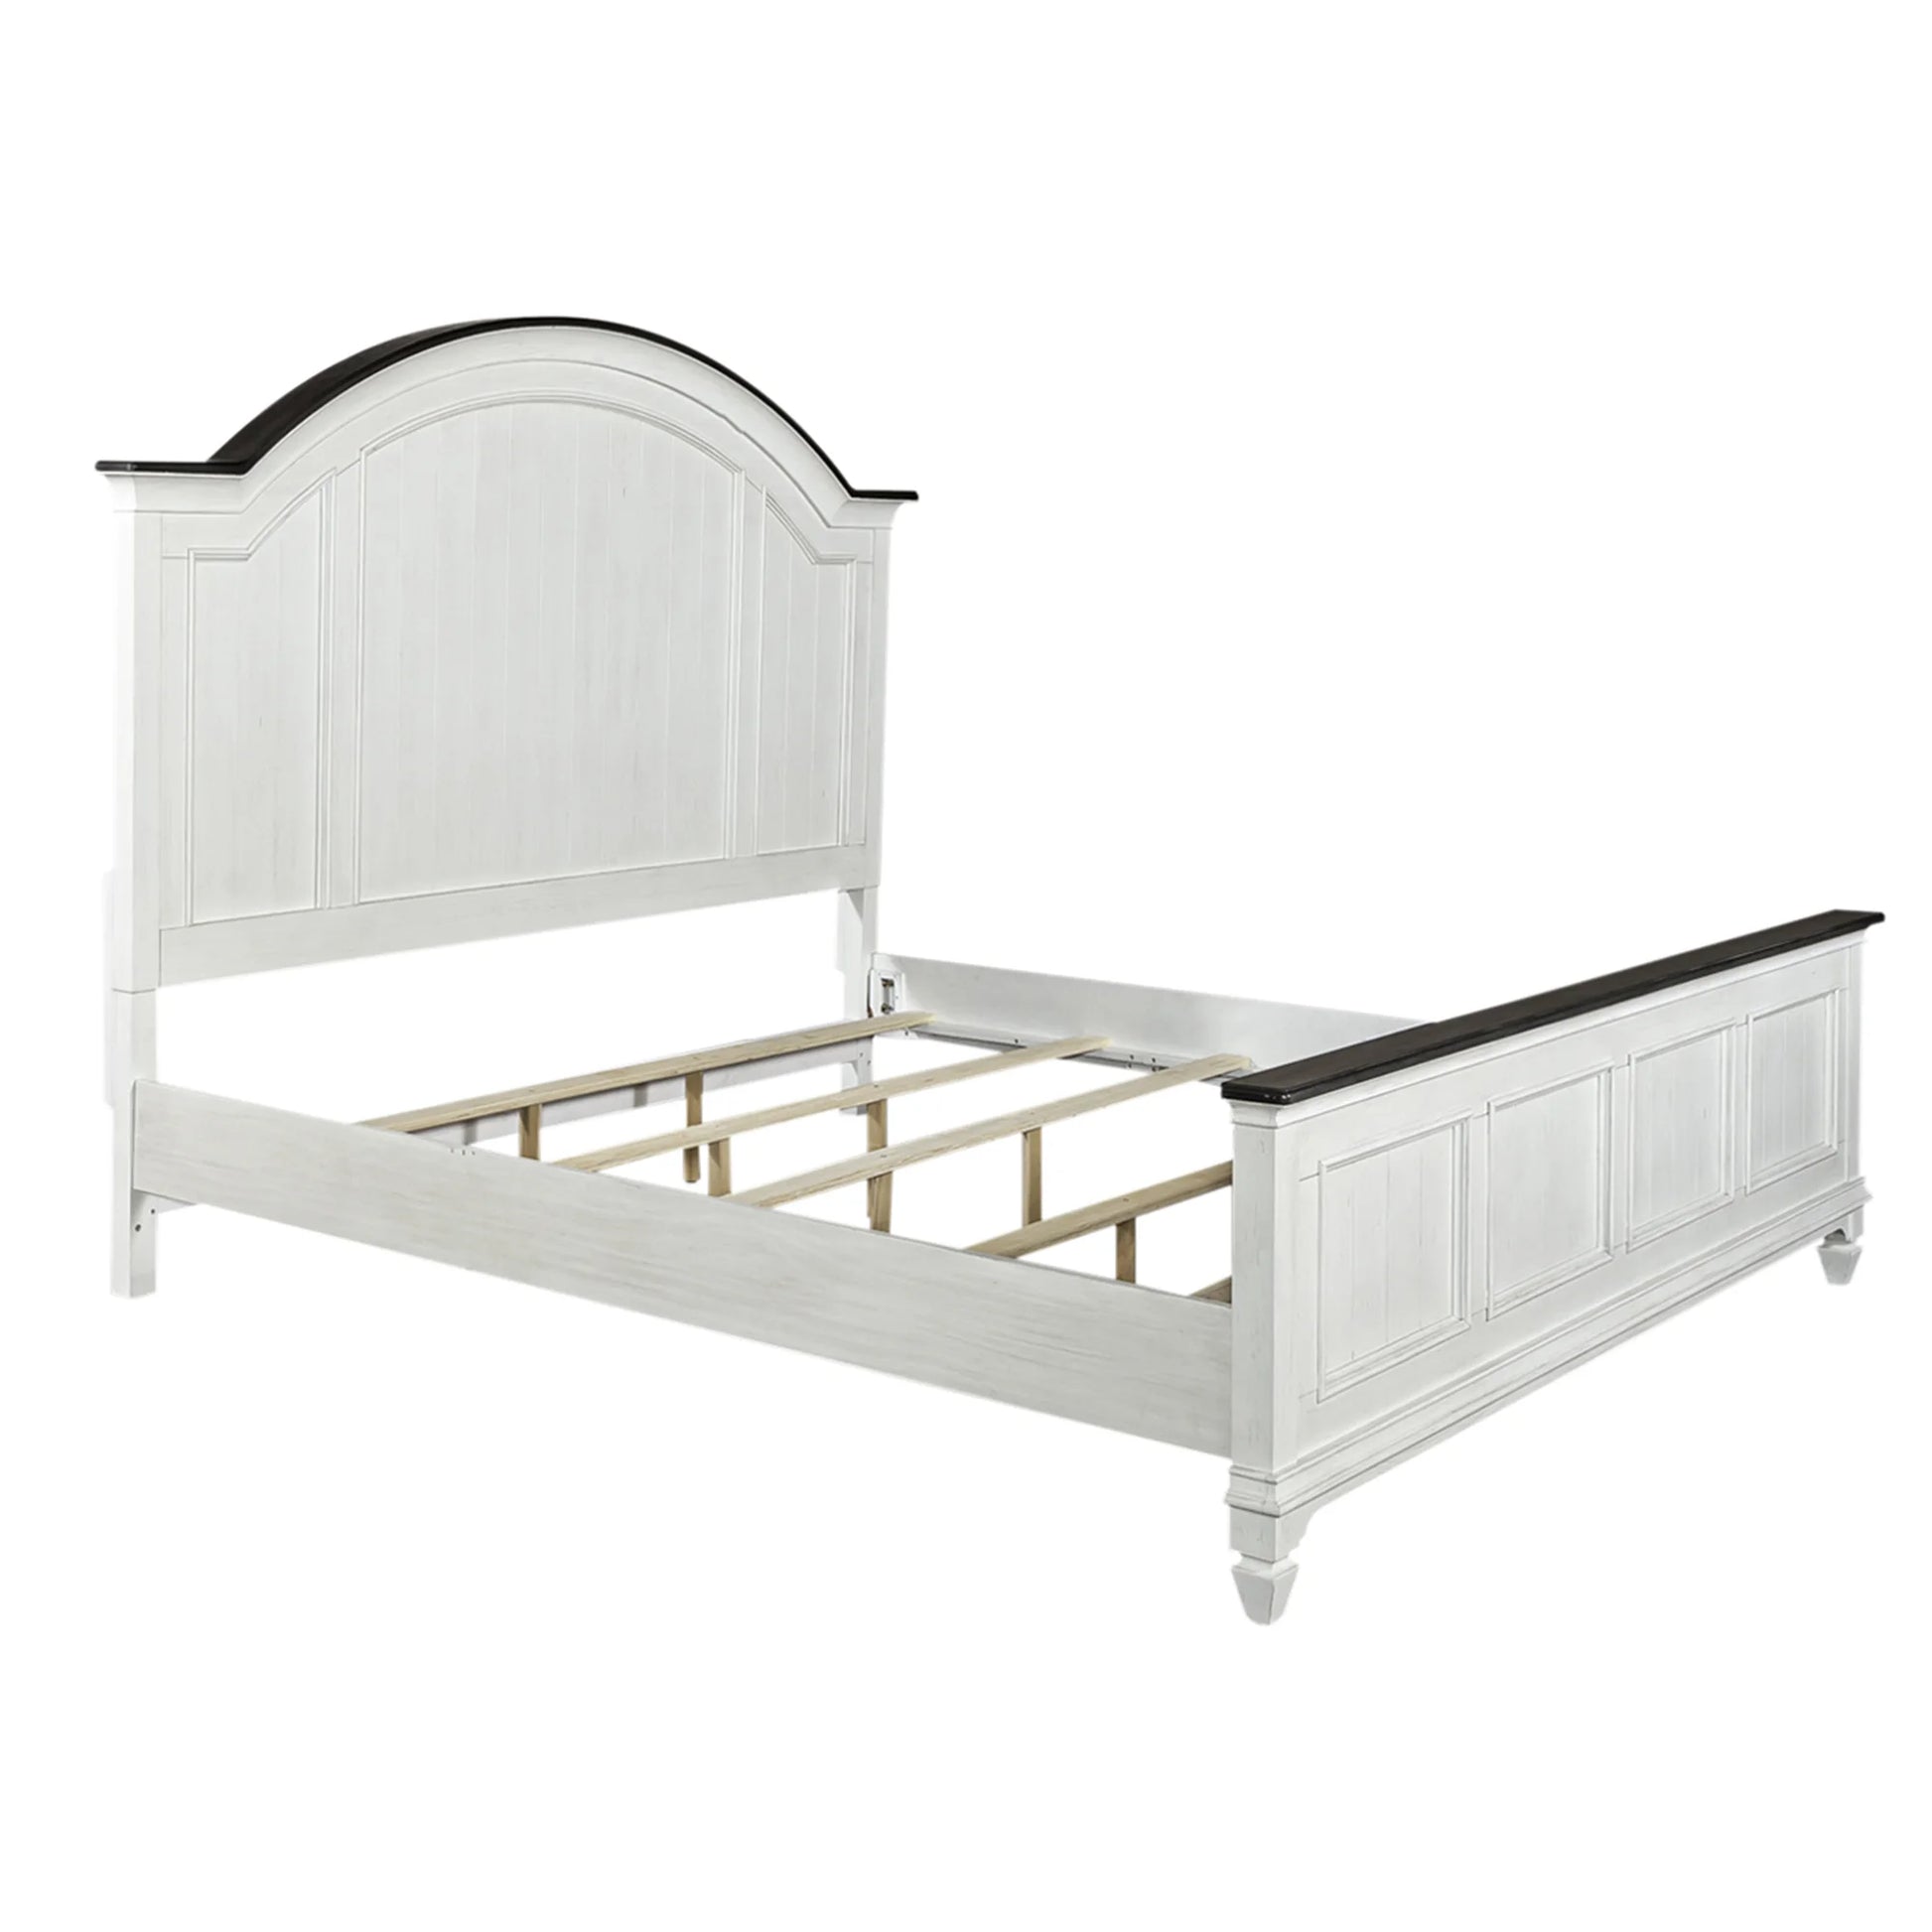 Allyson Park - King Arched Panel Bed - White 1